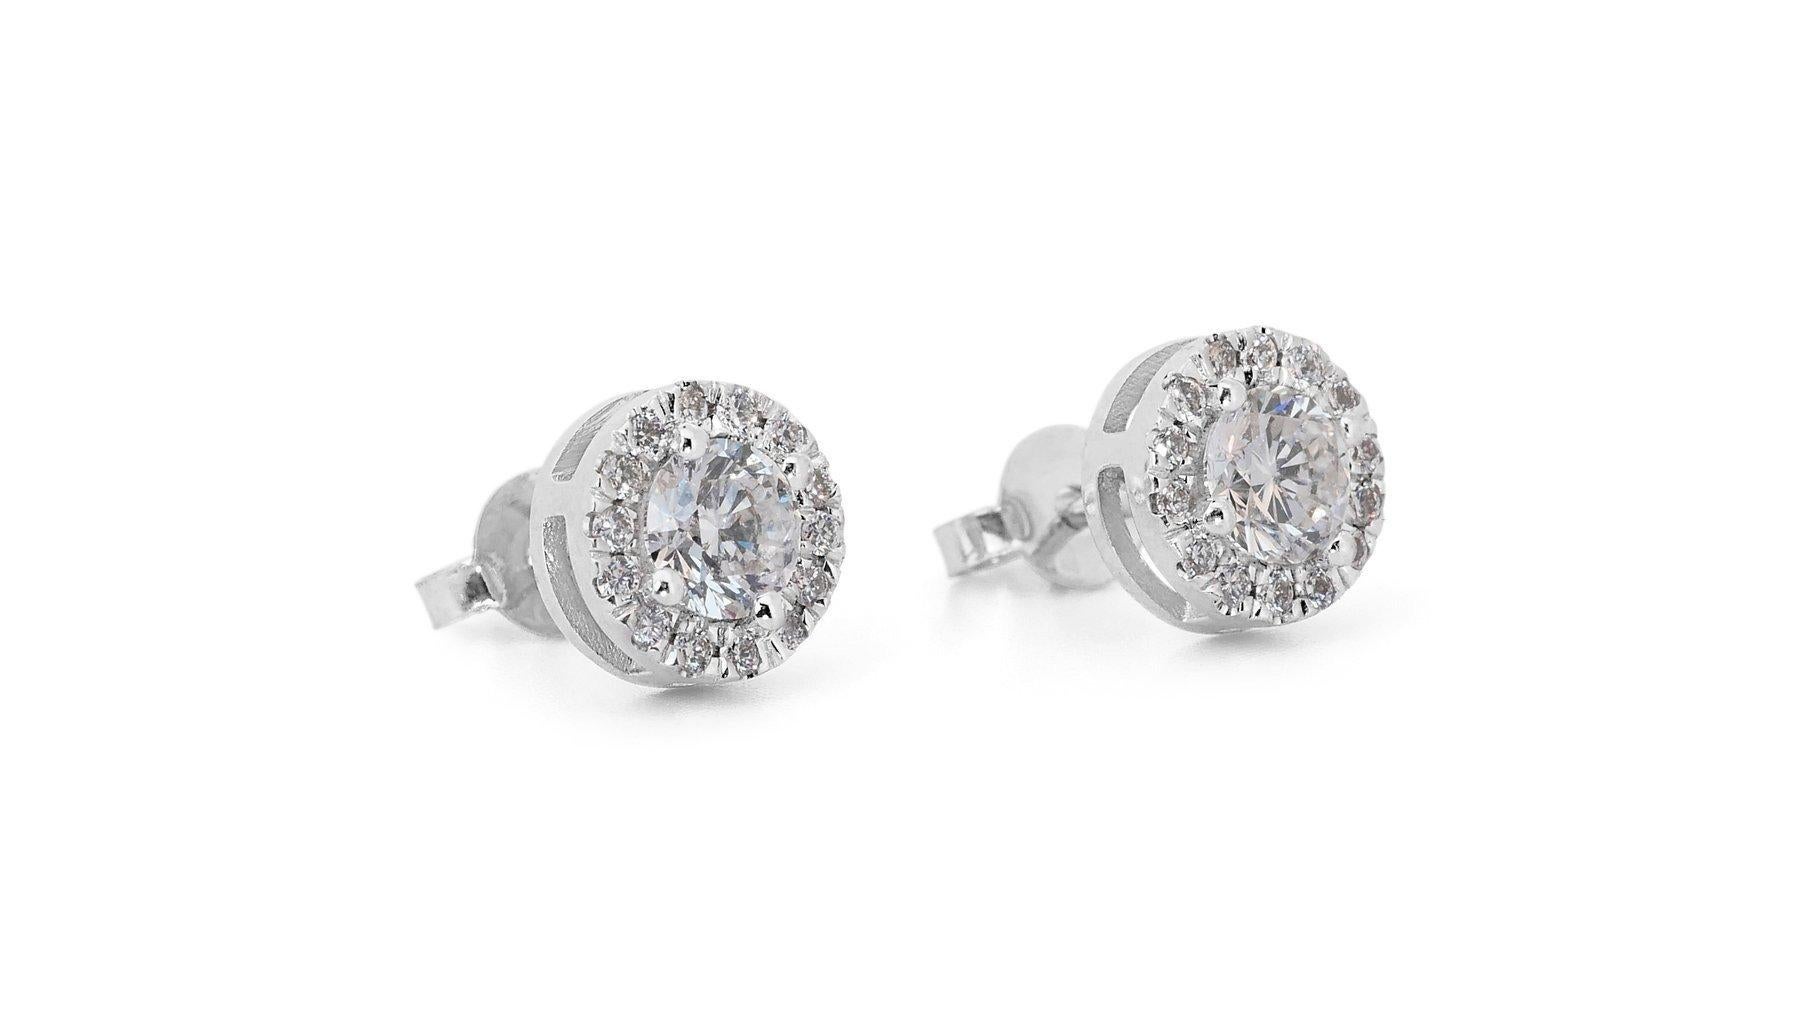 Elegant 1.68ct Diamond Halo Stud Earrings in 18k White Gold - GIA Certified In New Condition For Sale In רמת גן, IL